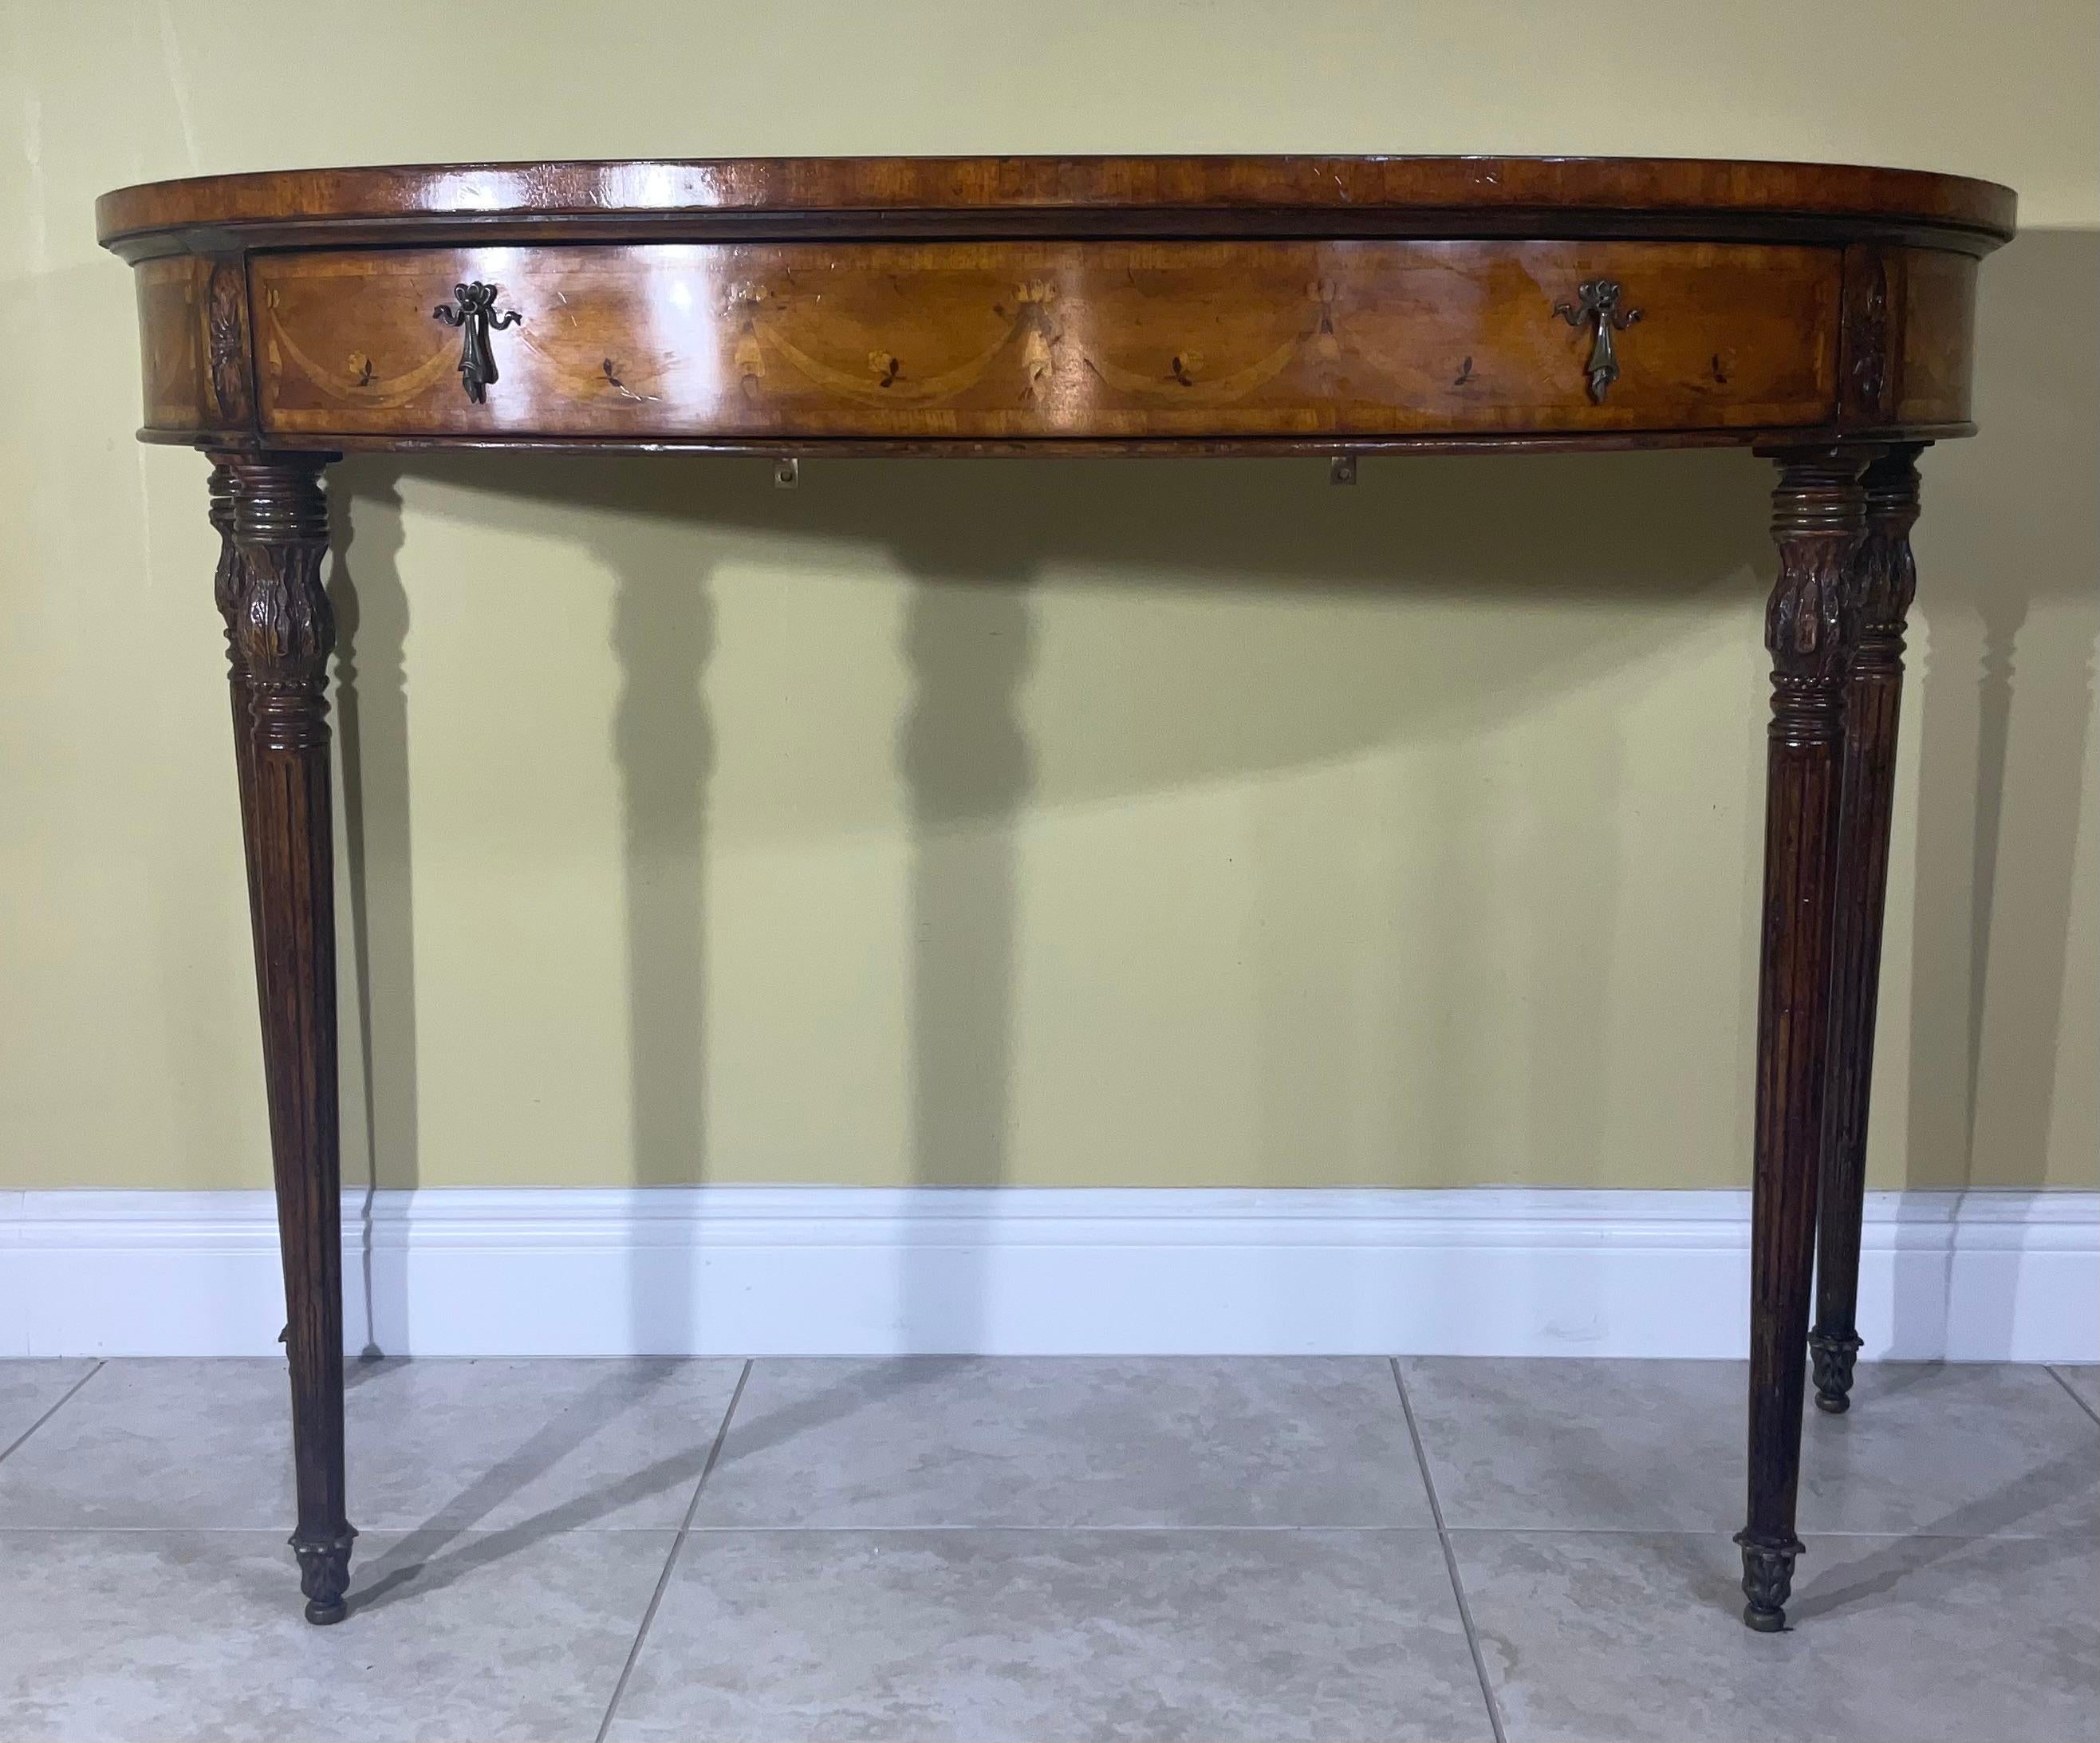 
An extremely fine Satinwood Pier table,  decorated and finely inlaid with fruit woods and depicting vine and flowers , elegant hand carved legs, with bronze and brass hardware, one top draw. In the back of table two pieces of metal attached the can